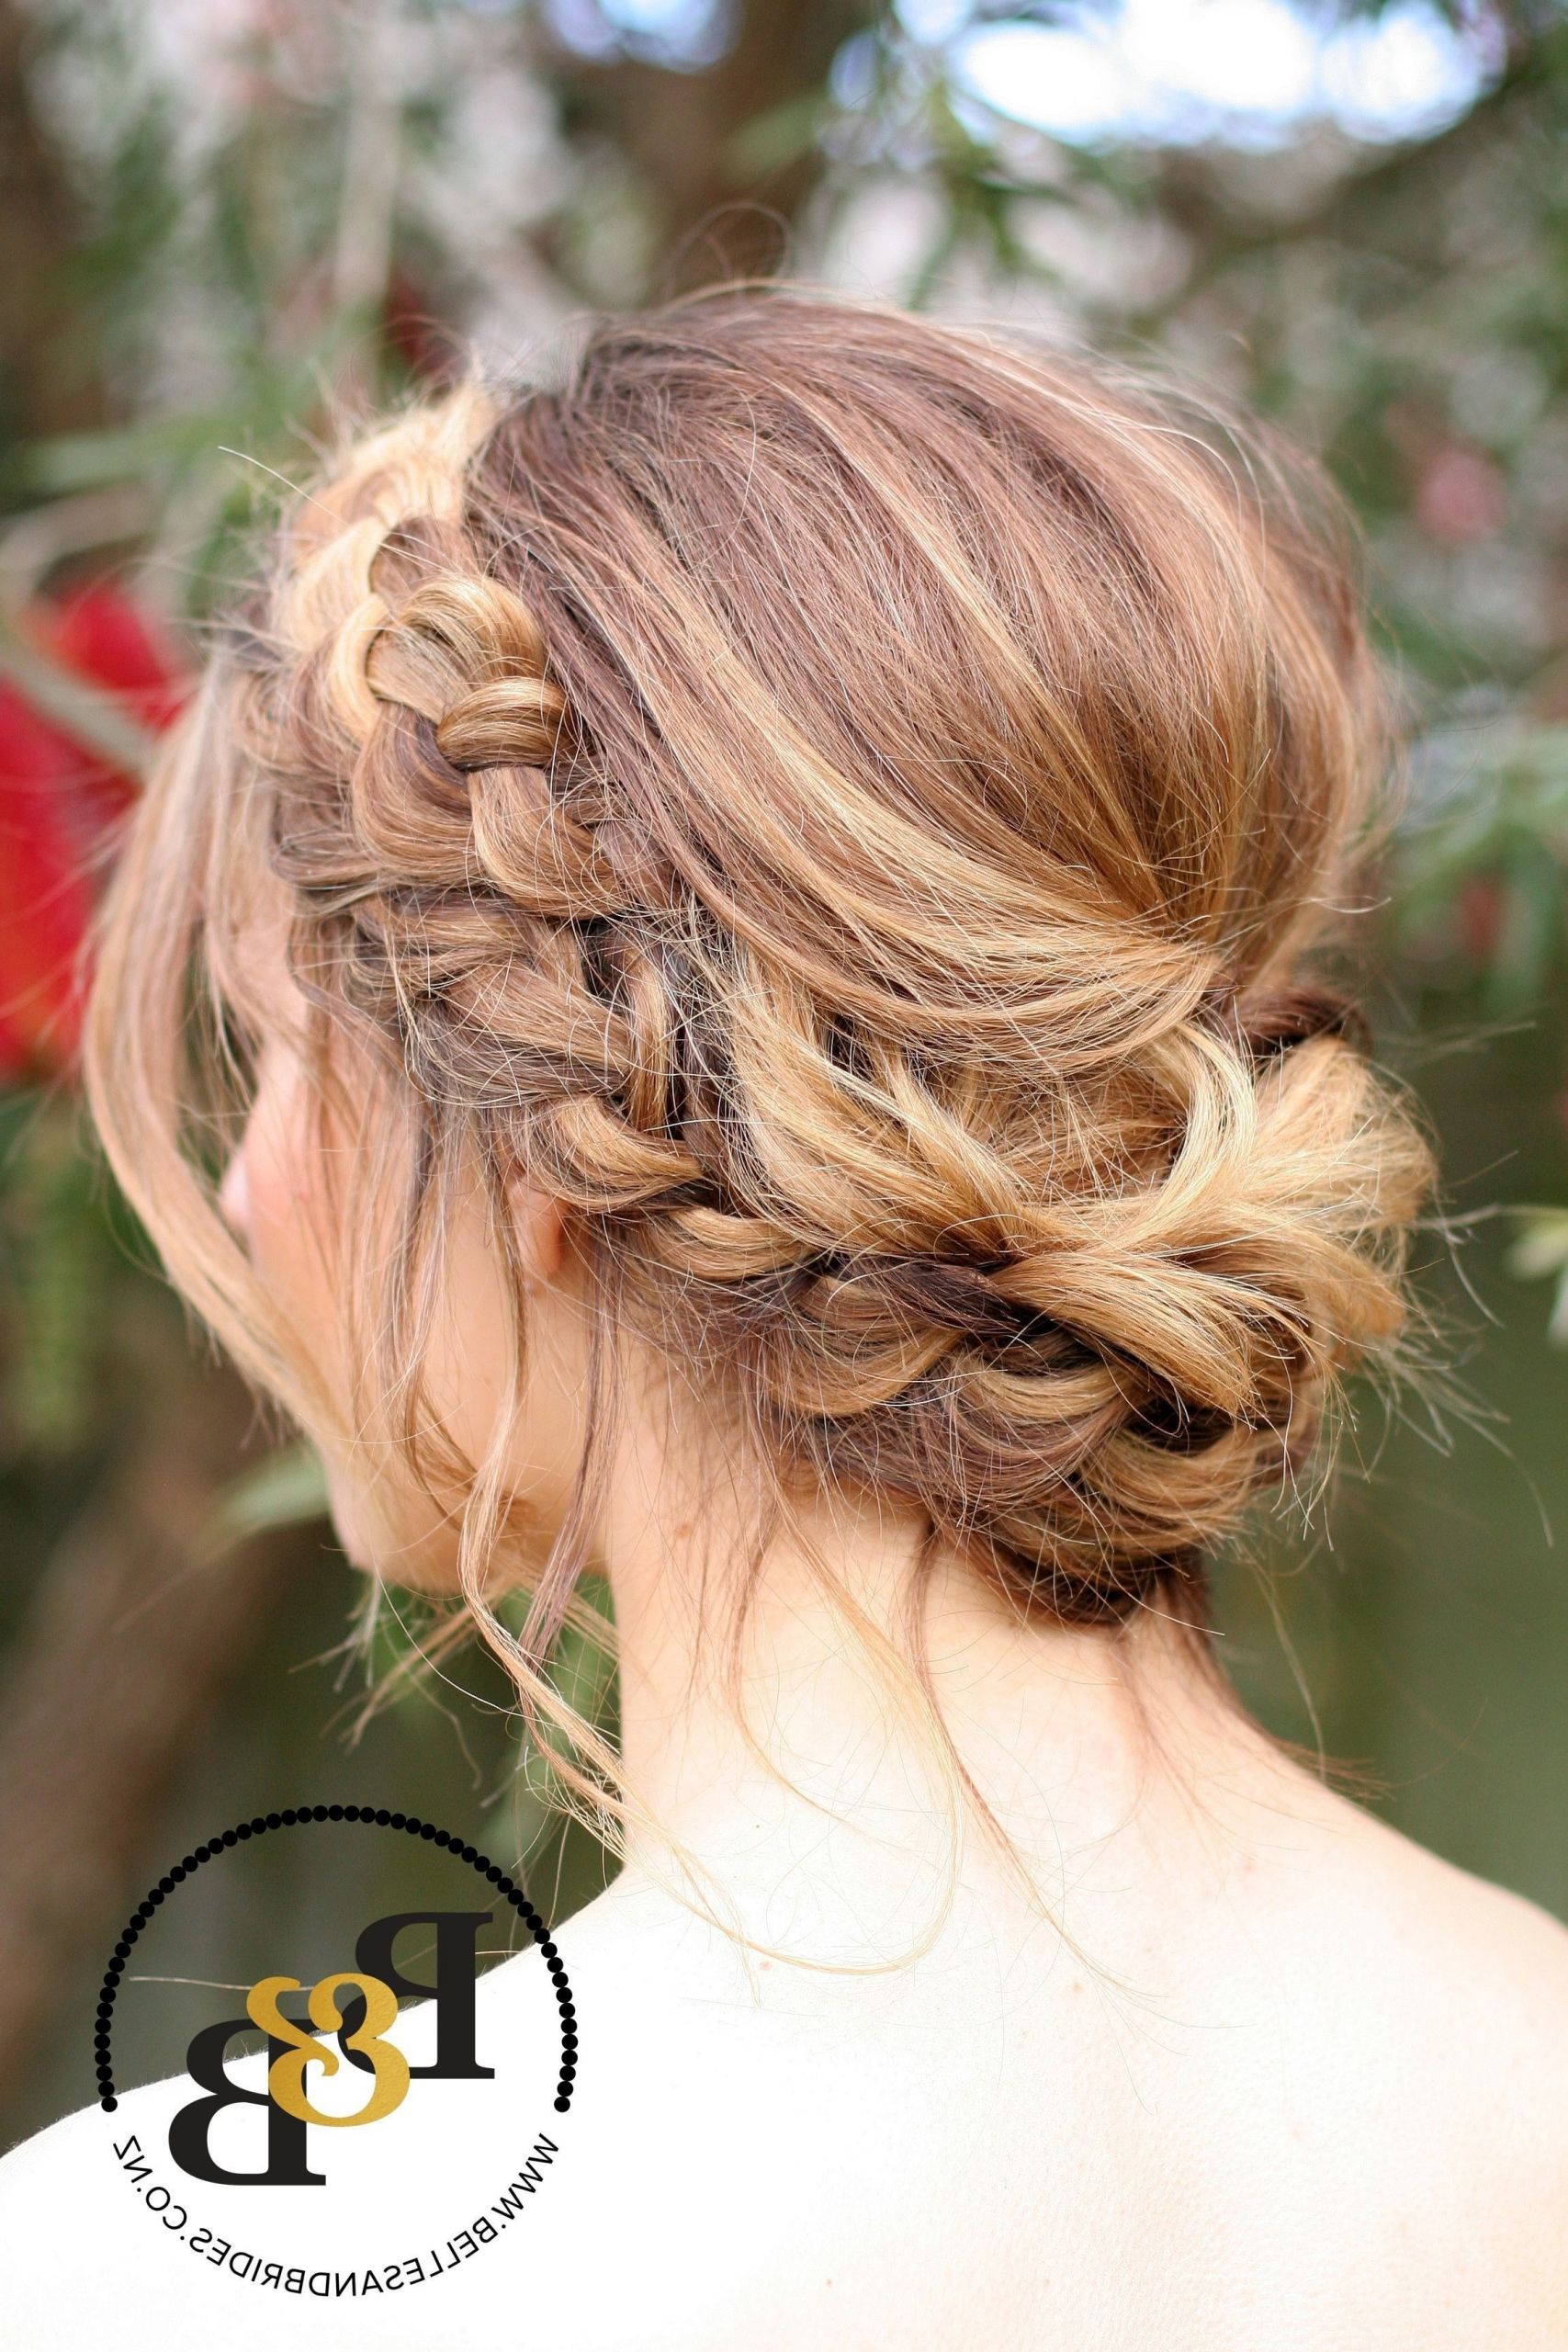 Cute Wedding Hairstyles For Bridesmaids
 15 Best Collection of Cute Wedding Hairstyles For Junior